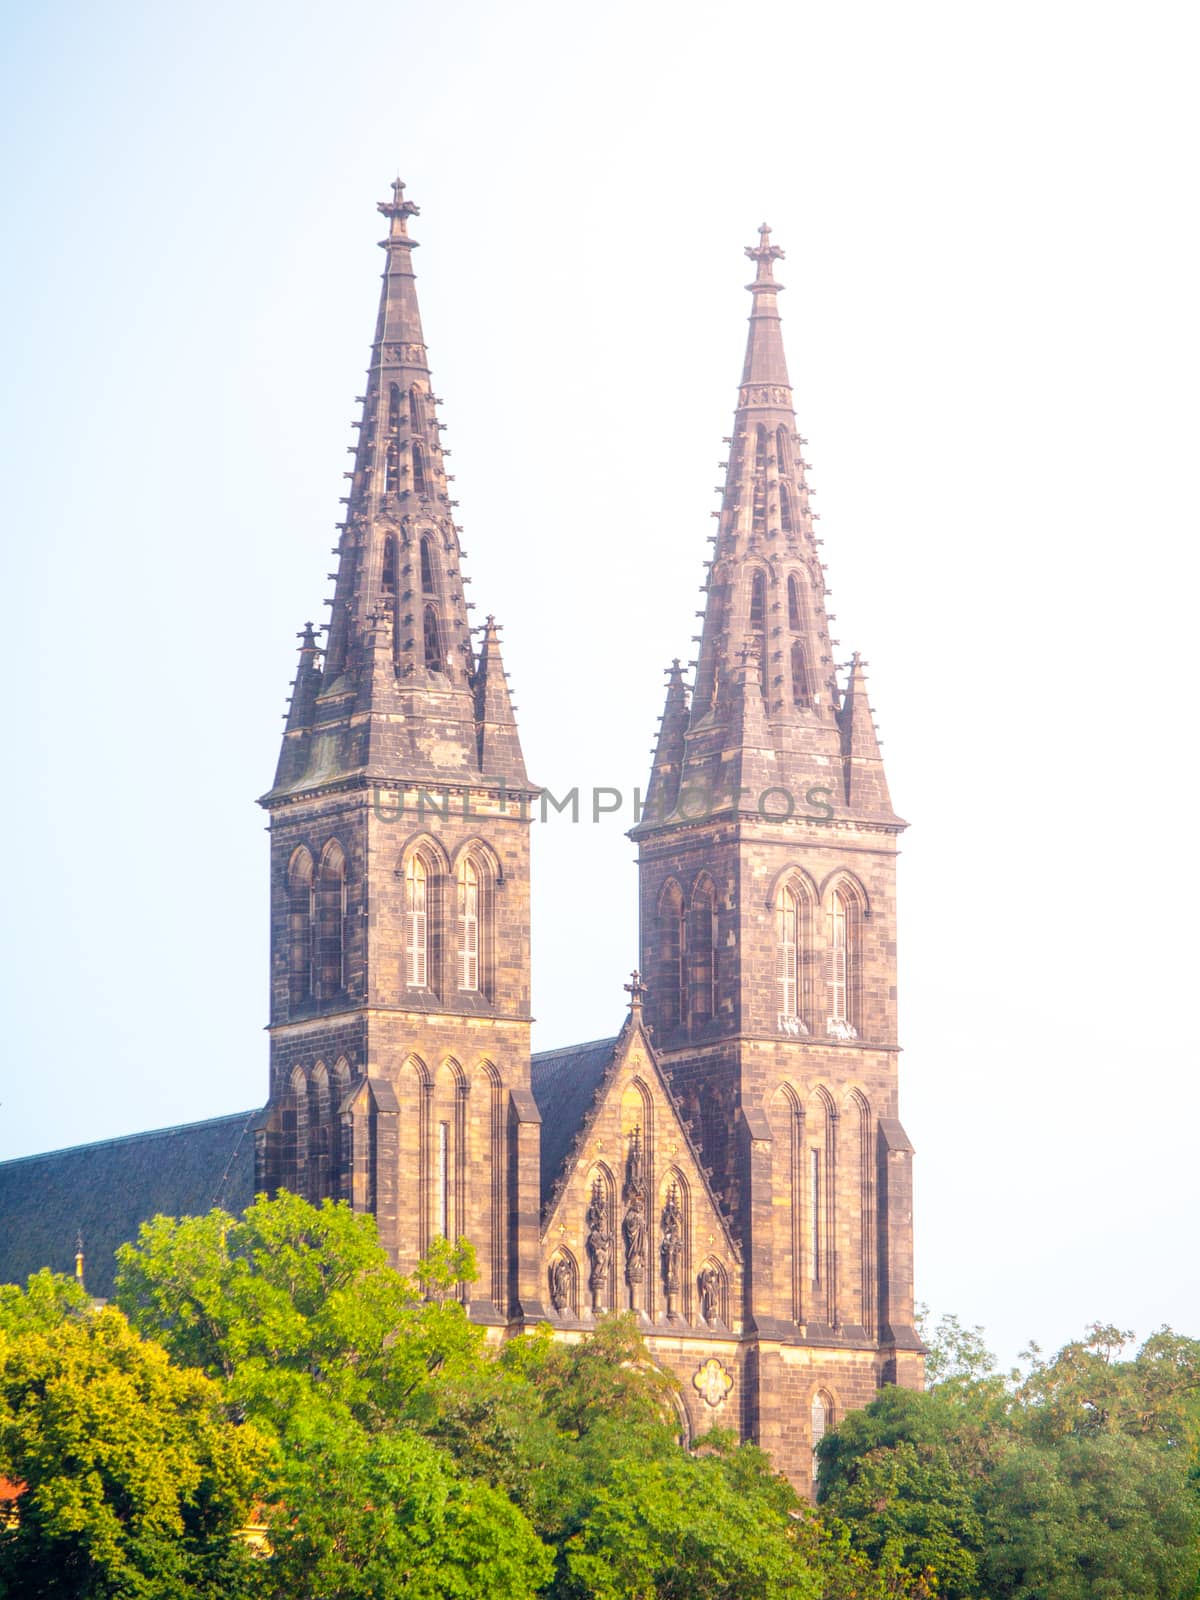 Two towers of Basilica of Saint Peter and Paul in Vysehrad complex, Prague, Czech Republic.